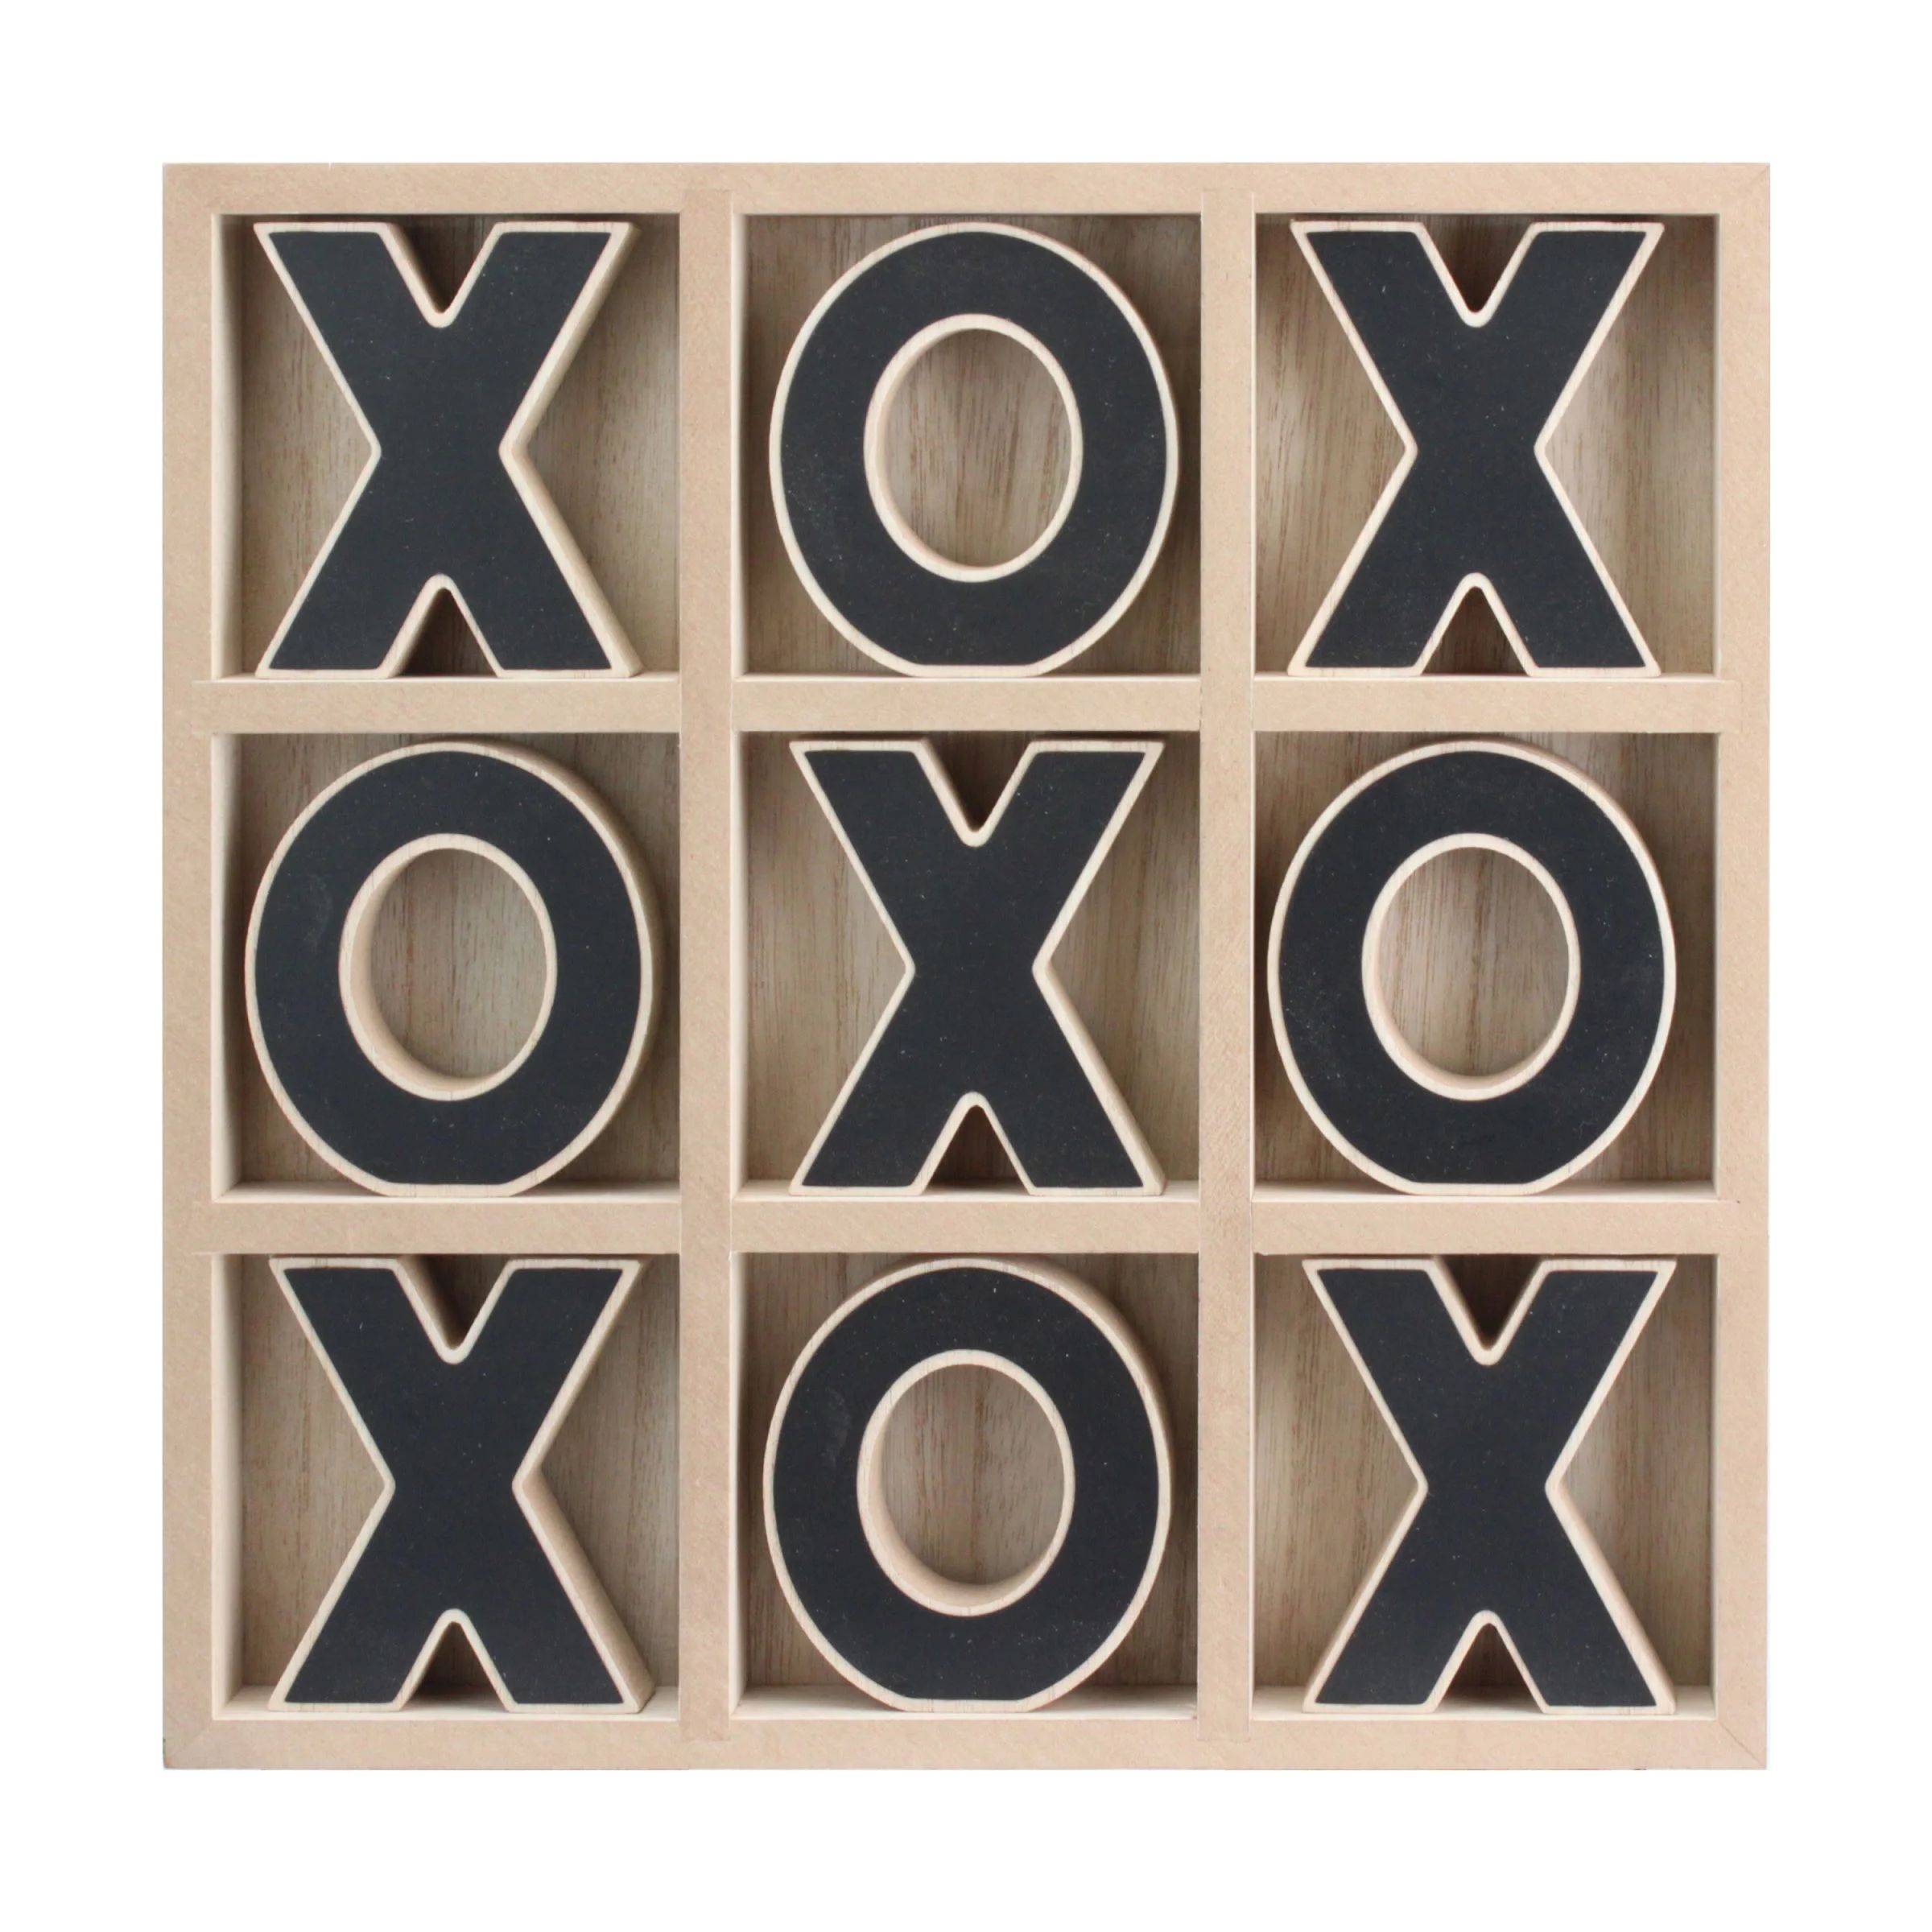 Best seller Mainstays Mainstays Decorative Wood Tic-Tac-Toe Set, Brown (4.8)4.8 stars out of 26 r... | Walmart (US)